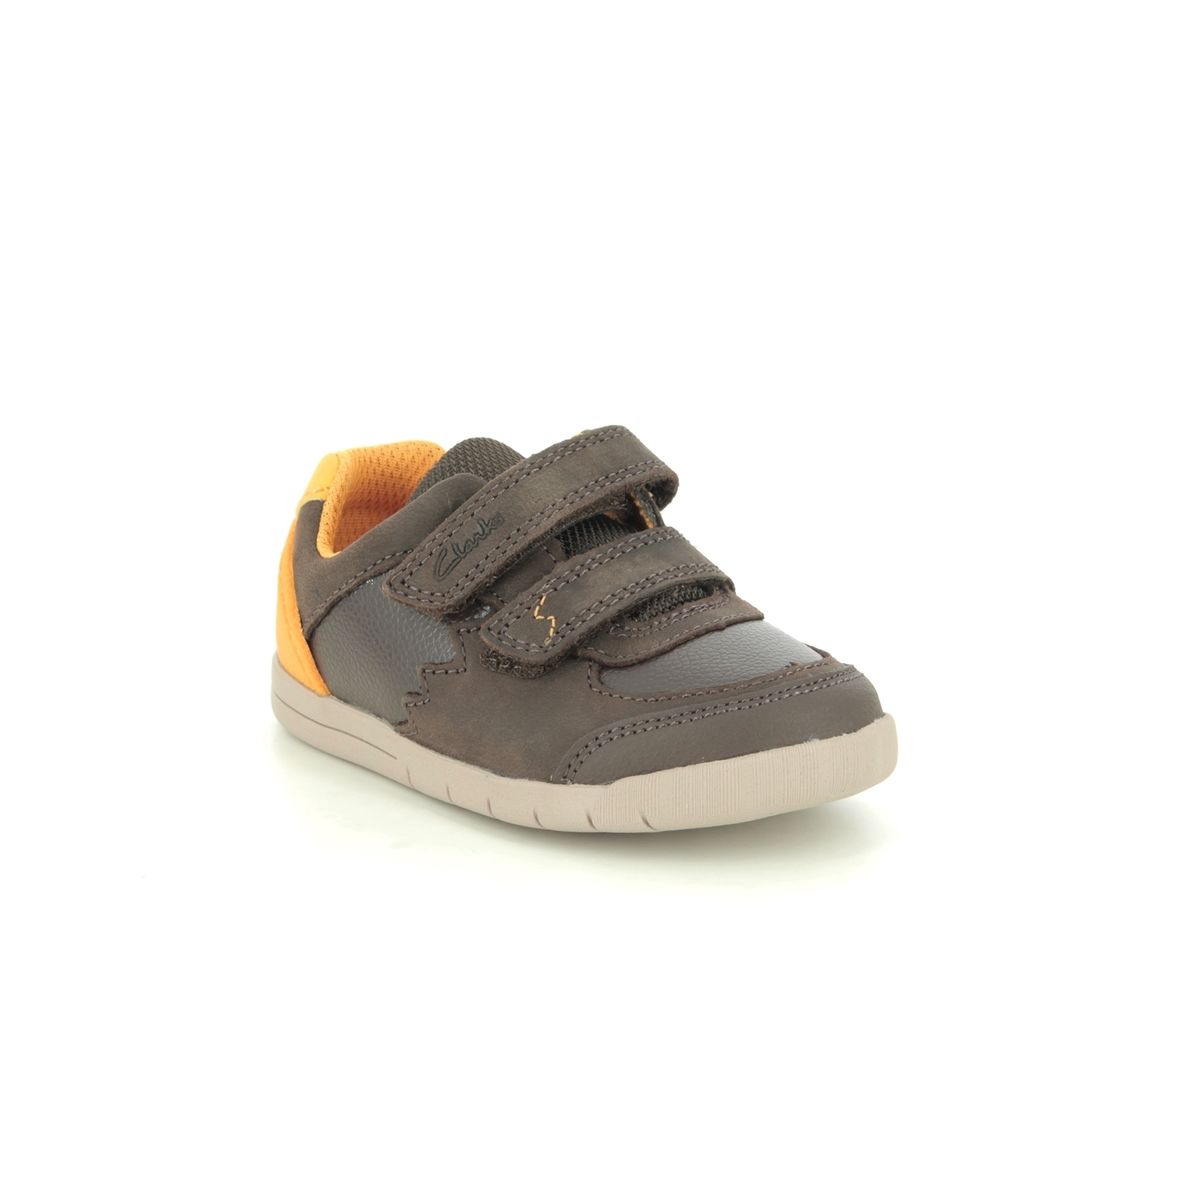 Clarks Rex Quest T Brown Leather Kids Boys Toddler Shoes 567756F In Size 9 In Plain Brown Leather F Width Fitting Regular Fit For kids